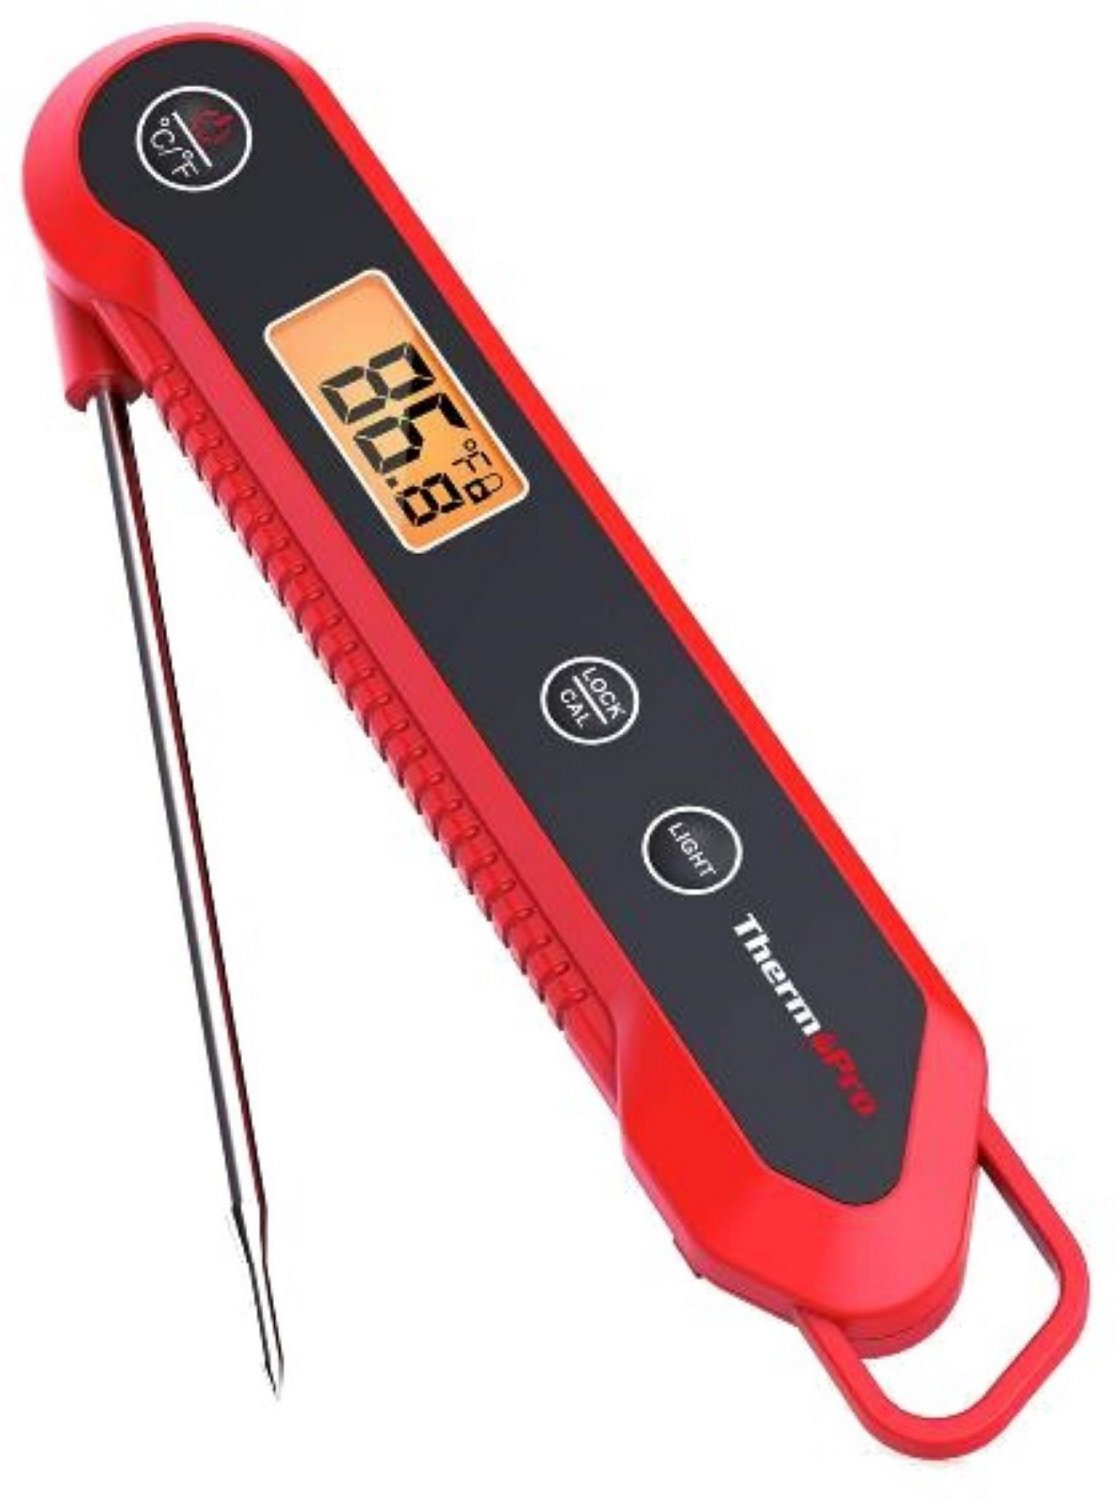  ThermoPro Digital Instant Read Meat Thermometer for